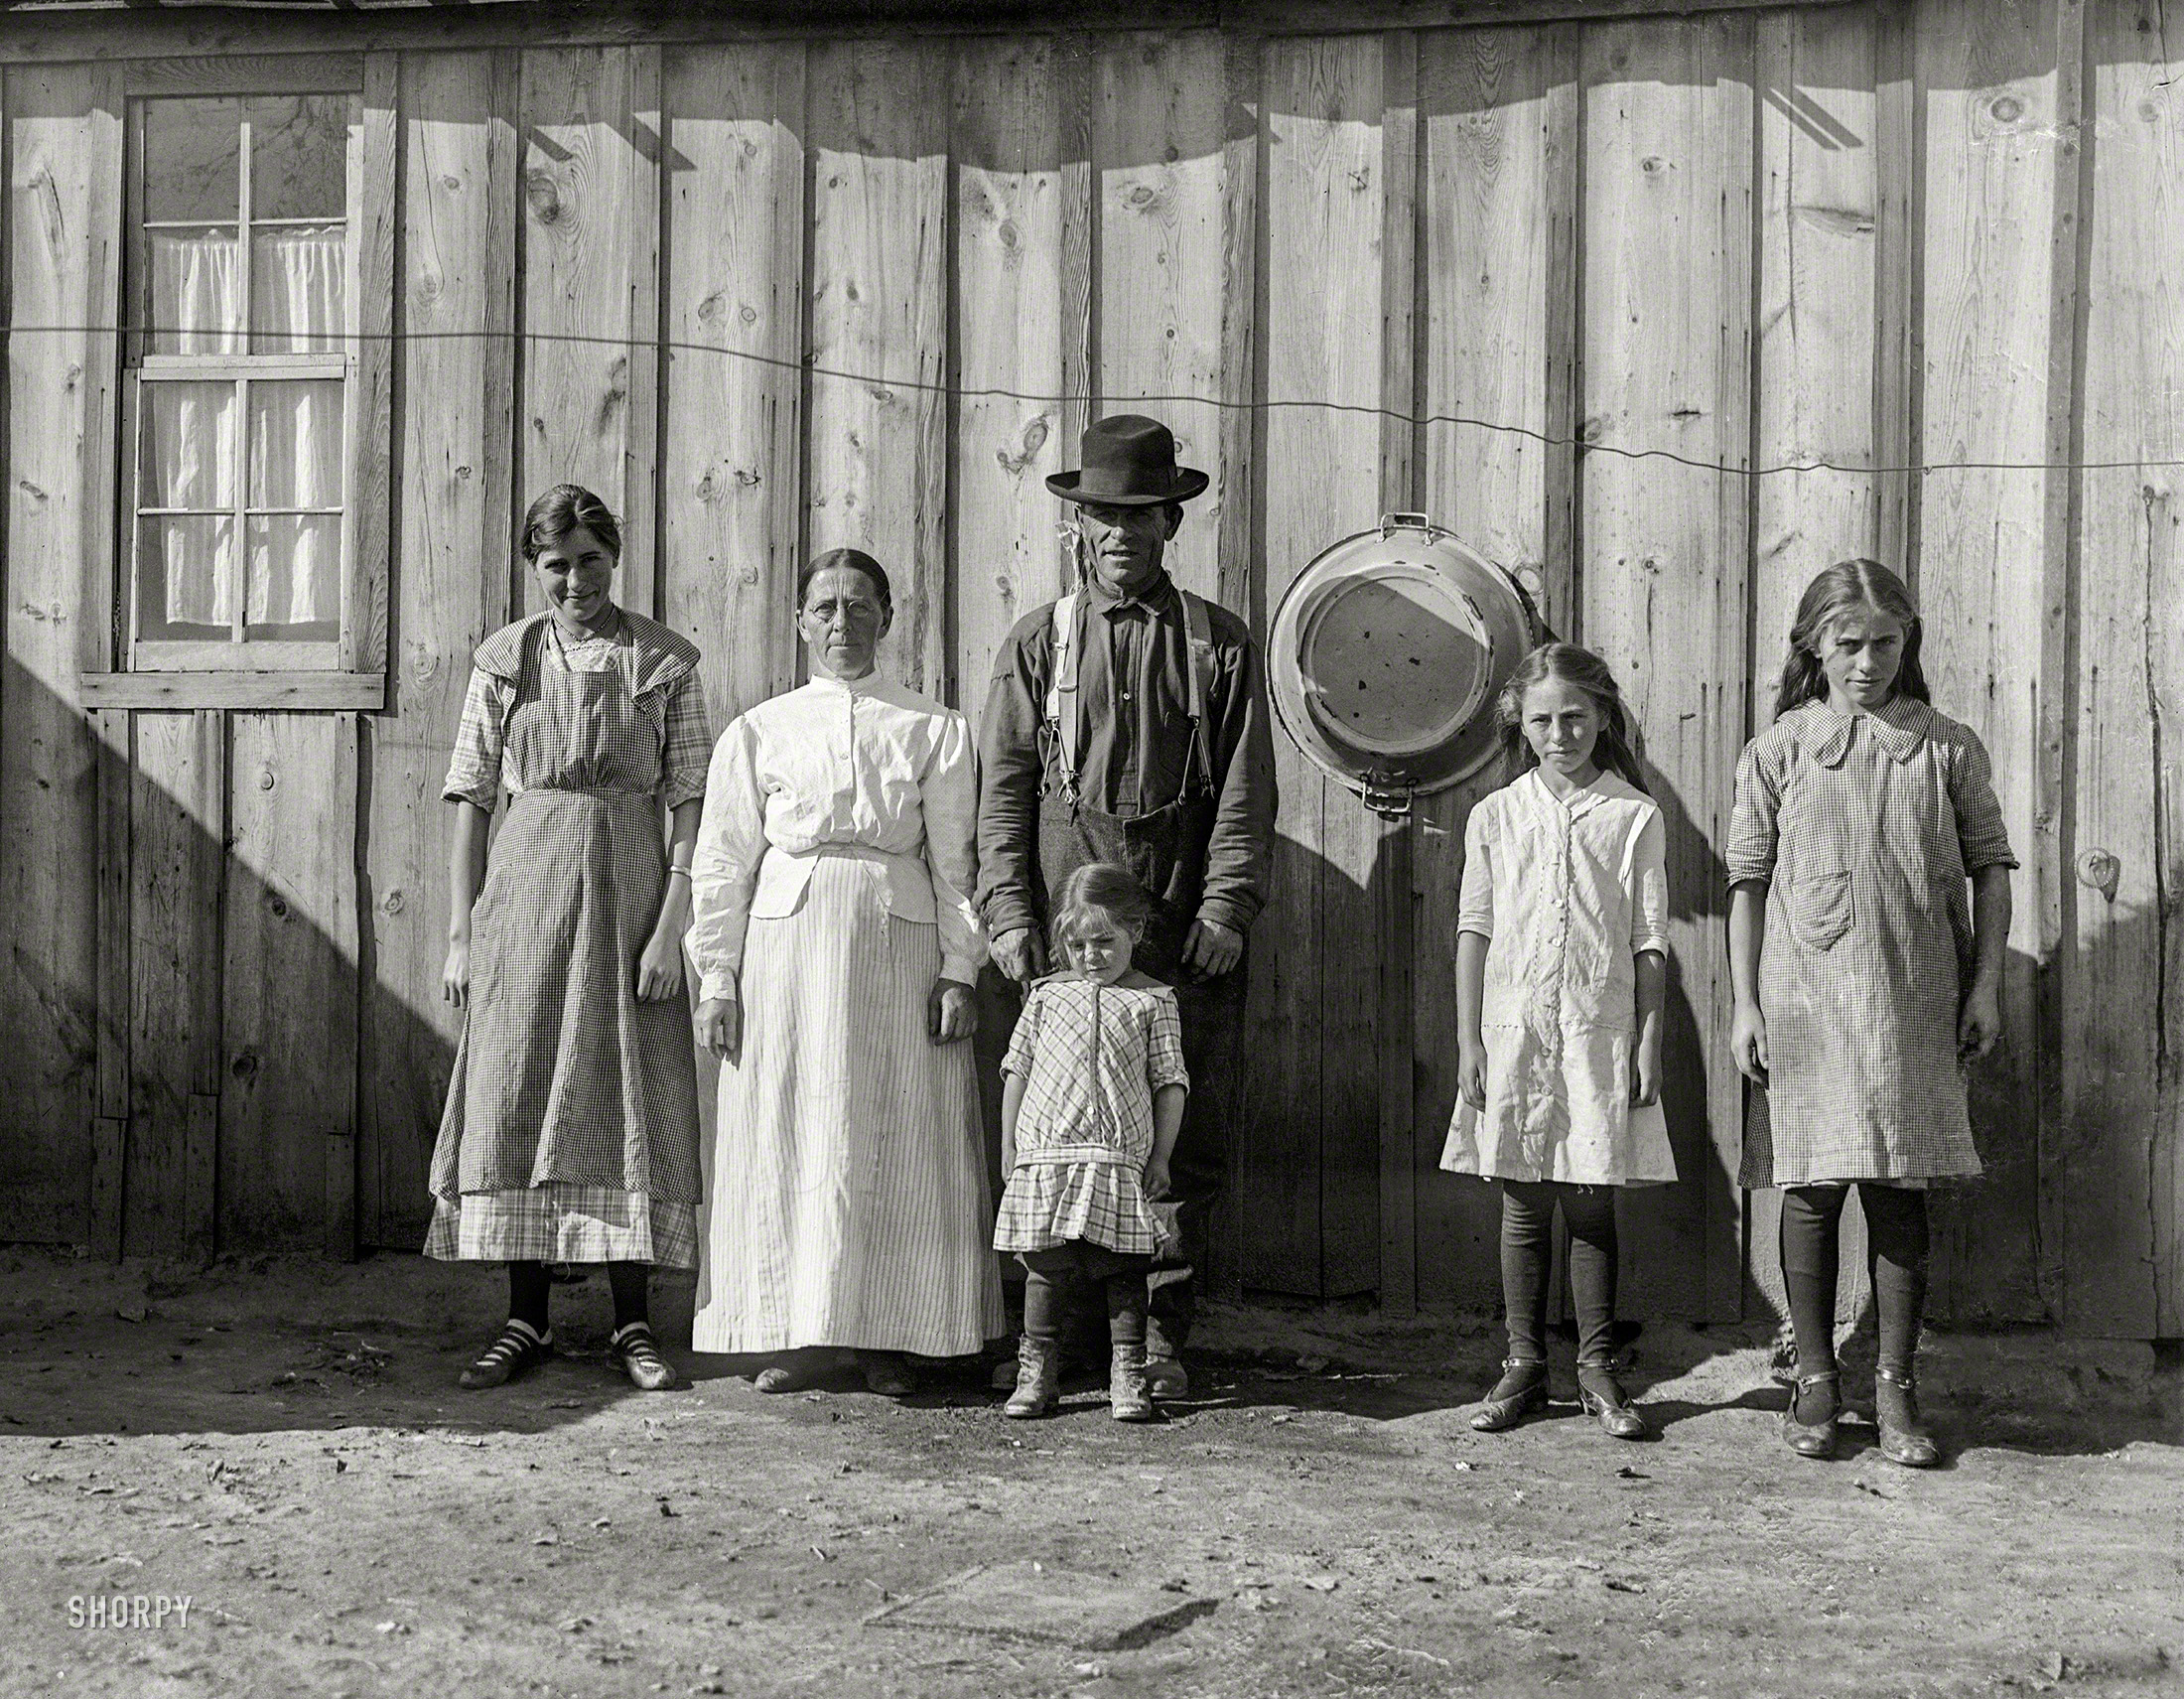 Oct. 30, 1915. Fort Collins (vicinity), Colorado. "A case of 'Economic Need.' Jacob Rommel and his family live in this roomy shack, well-furnished, with a good range, organ, etc. They own a good home in Fort Collins, but late in April they moved out here, taking contract for nearly 40 acres of beets, working their 9- and 10-year-old girls hard at piling and topping (although they are not rugged) and they will not return until November. The little girl said, 'Piling is hardest, it gets your back. I have cut myself some, topping.' The older girl said, 'Don't you call us Russians, we're Germans' (although most of them were born in Russia). Family been in this country eleven years." Glass negative by Lewis Wickes Hine. View full size.